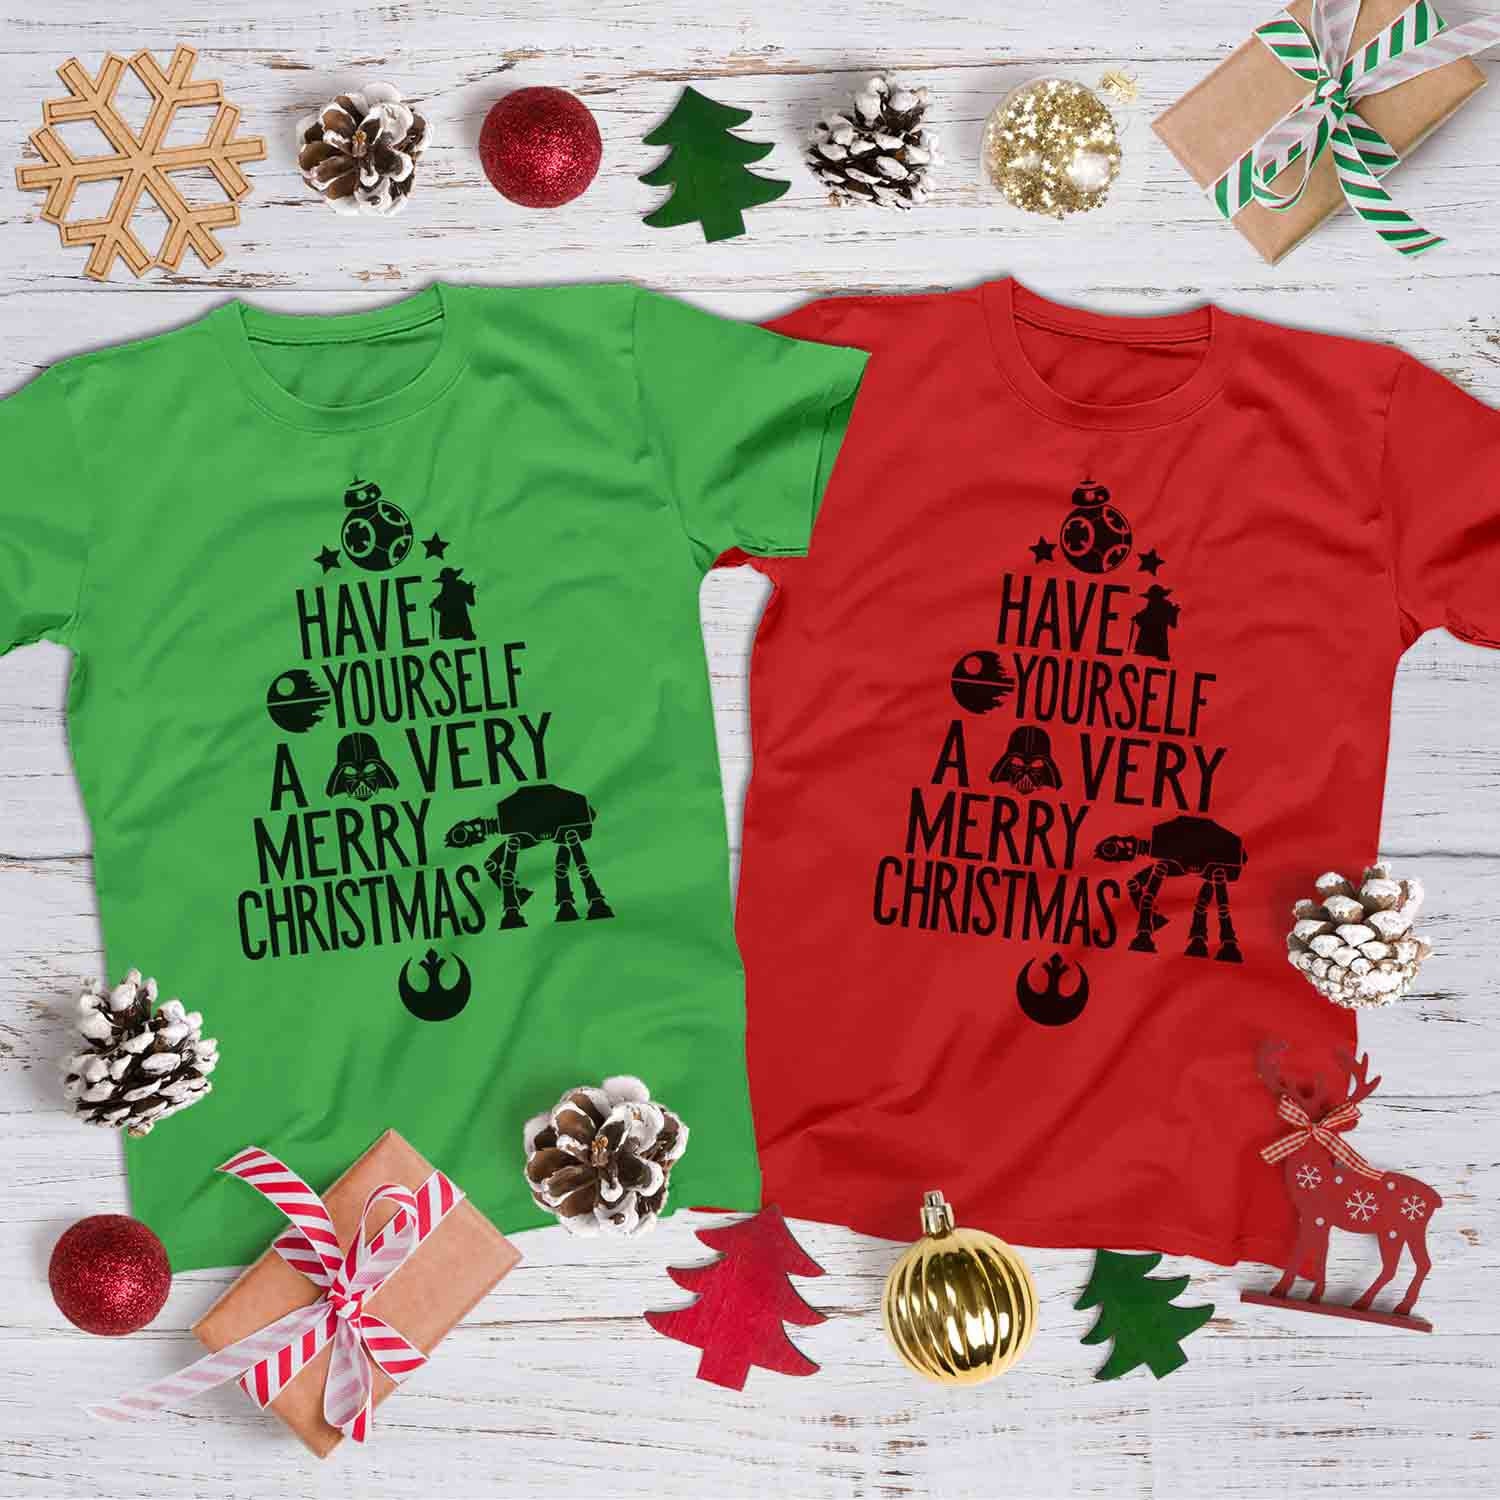 toevoegen aan Balling vijand Star Wars Have Yourself a Very Merry Christmas Shirts Disney - Etsy